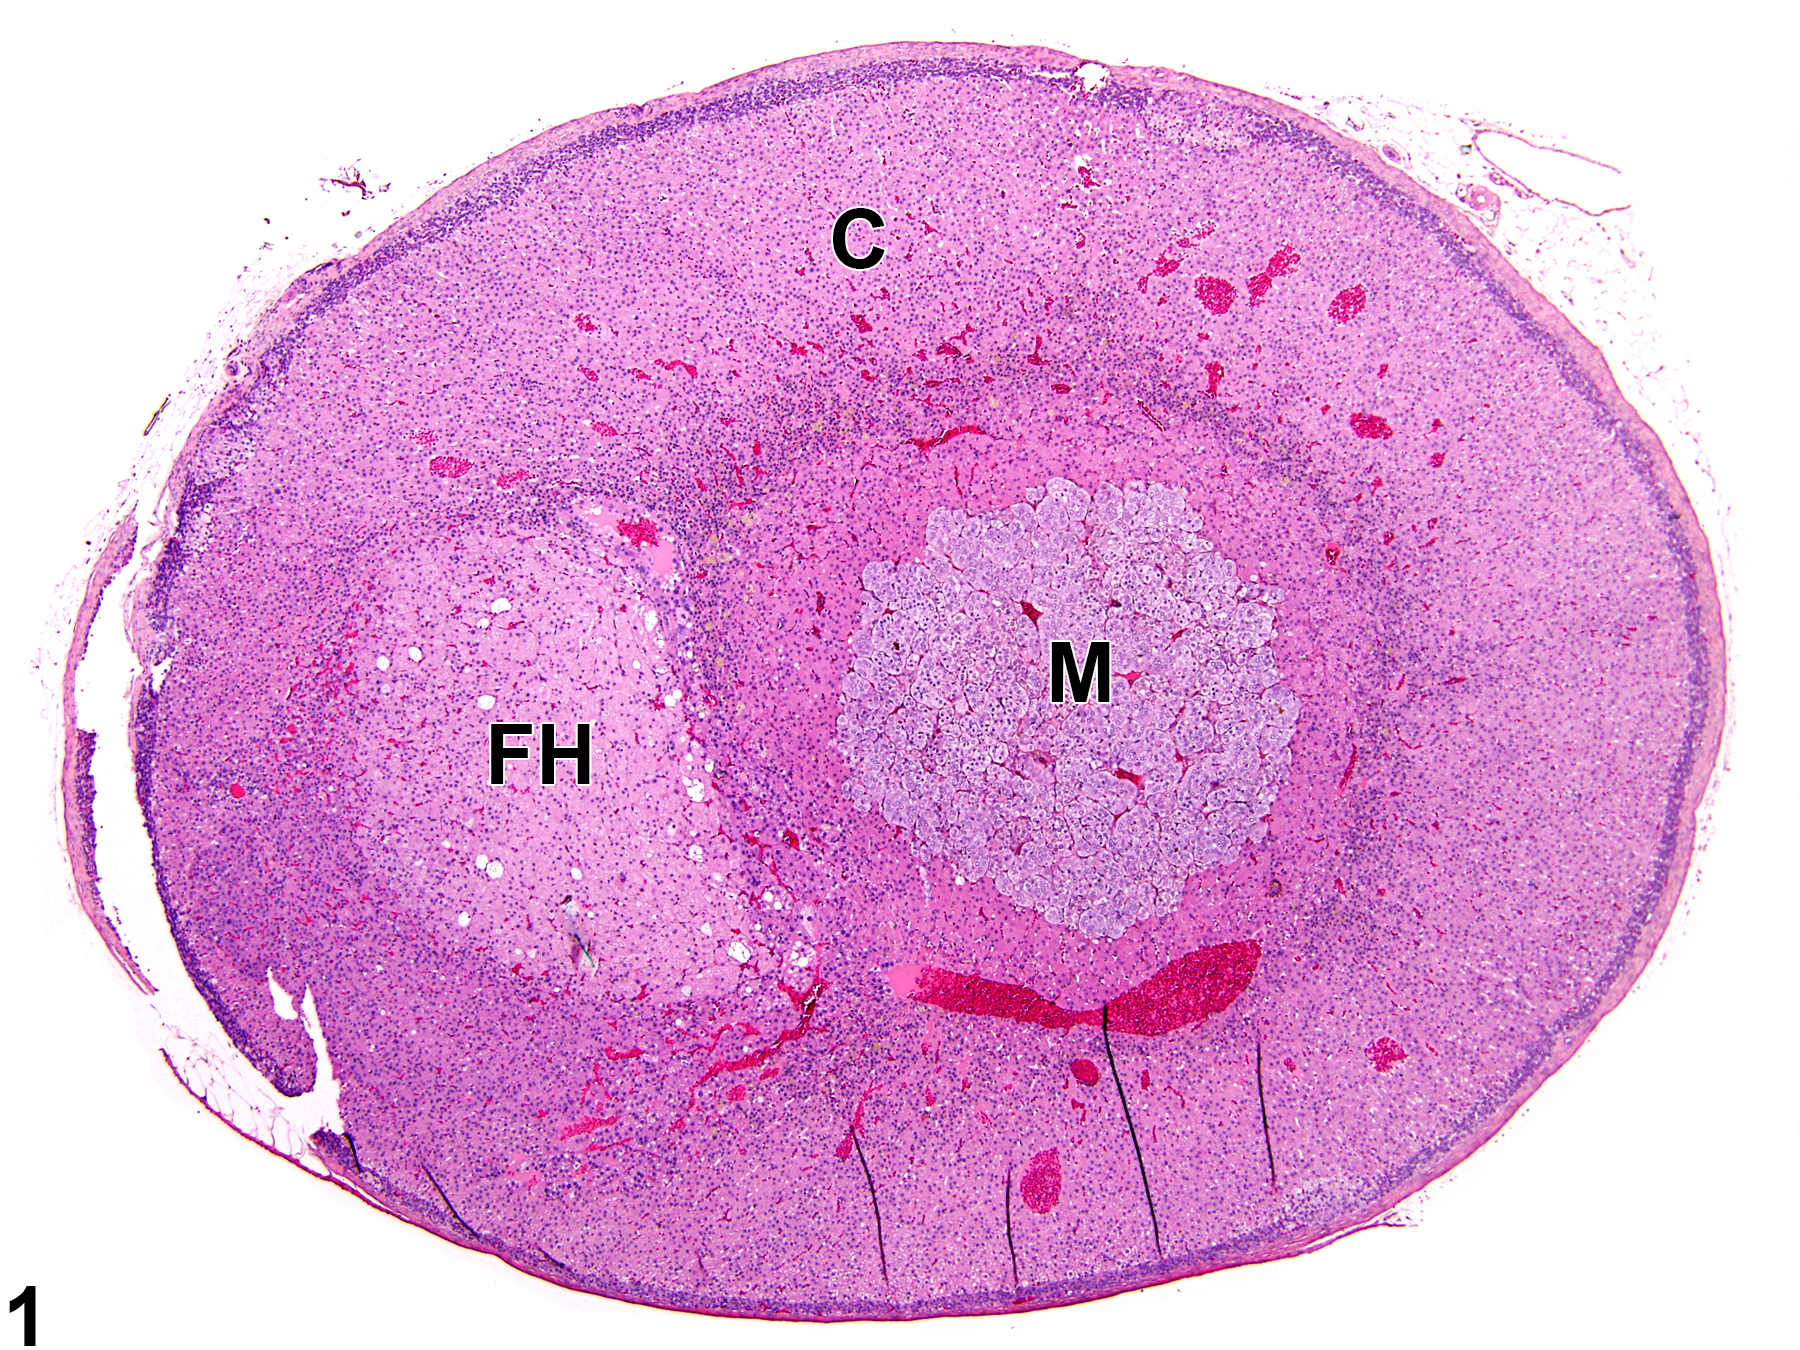 Image of hypertrophy in the adrenal gland cortex from a female Sprague-Dawley rat in a chronic study